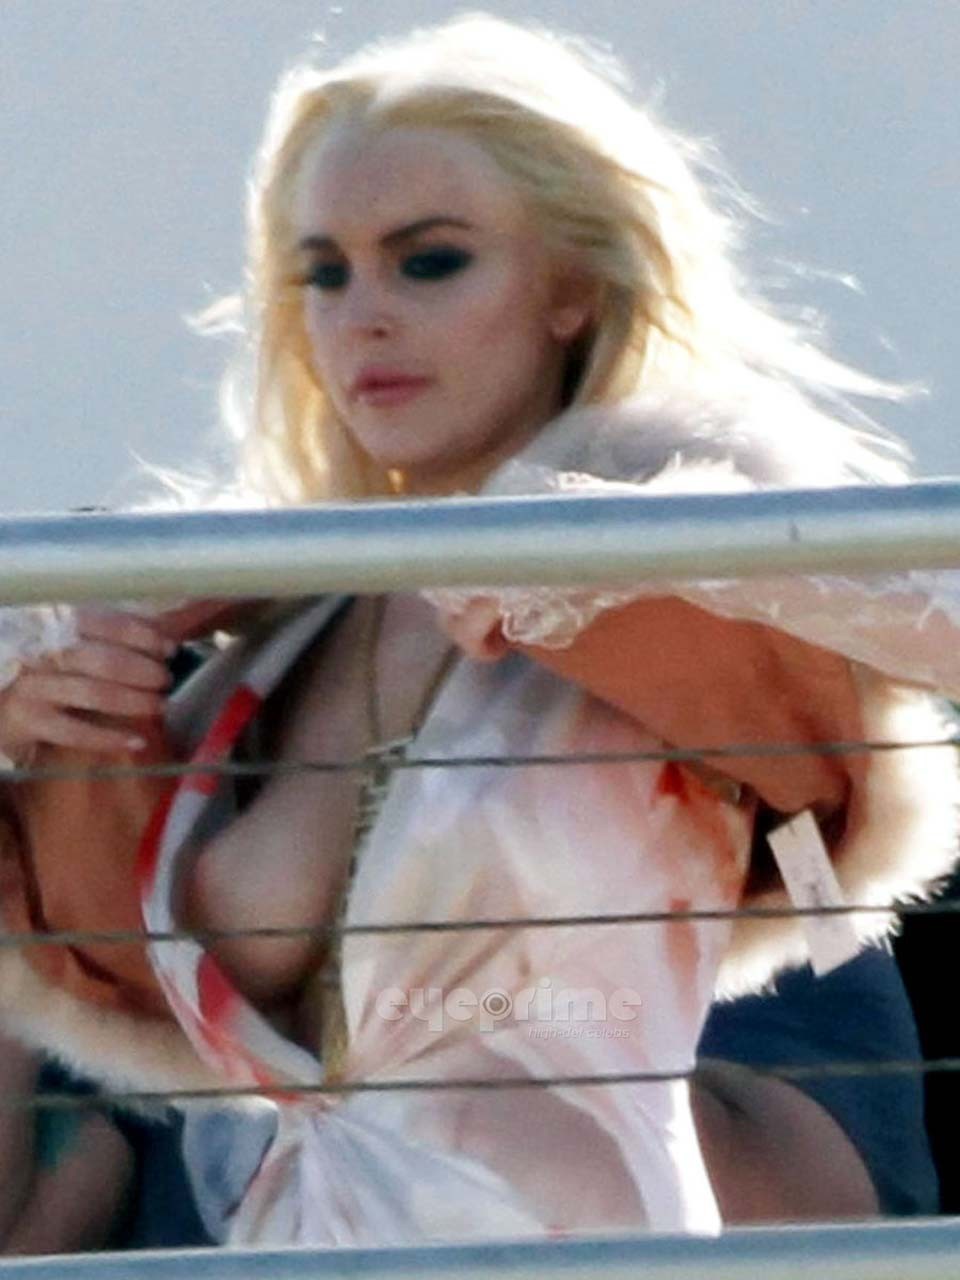 Lindsay Lohan flashing her boobs while doing some photoshoot paparazzi pictures